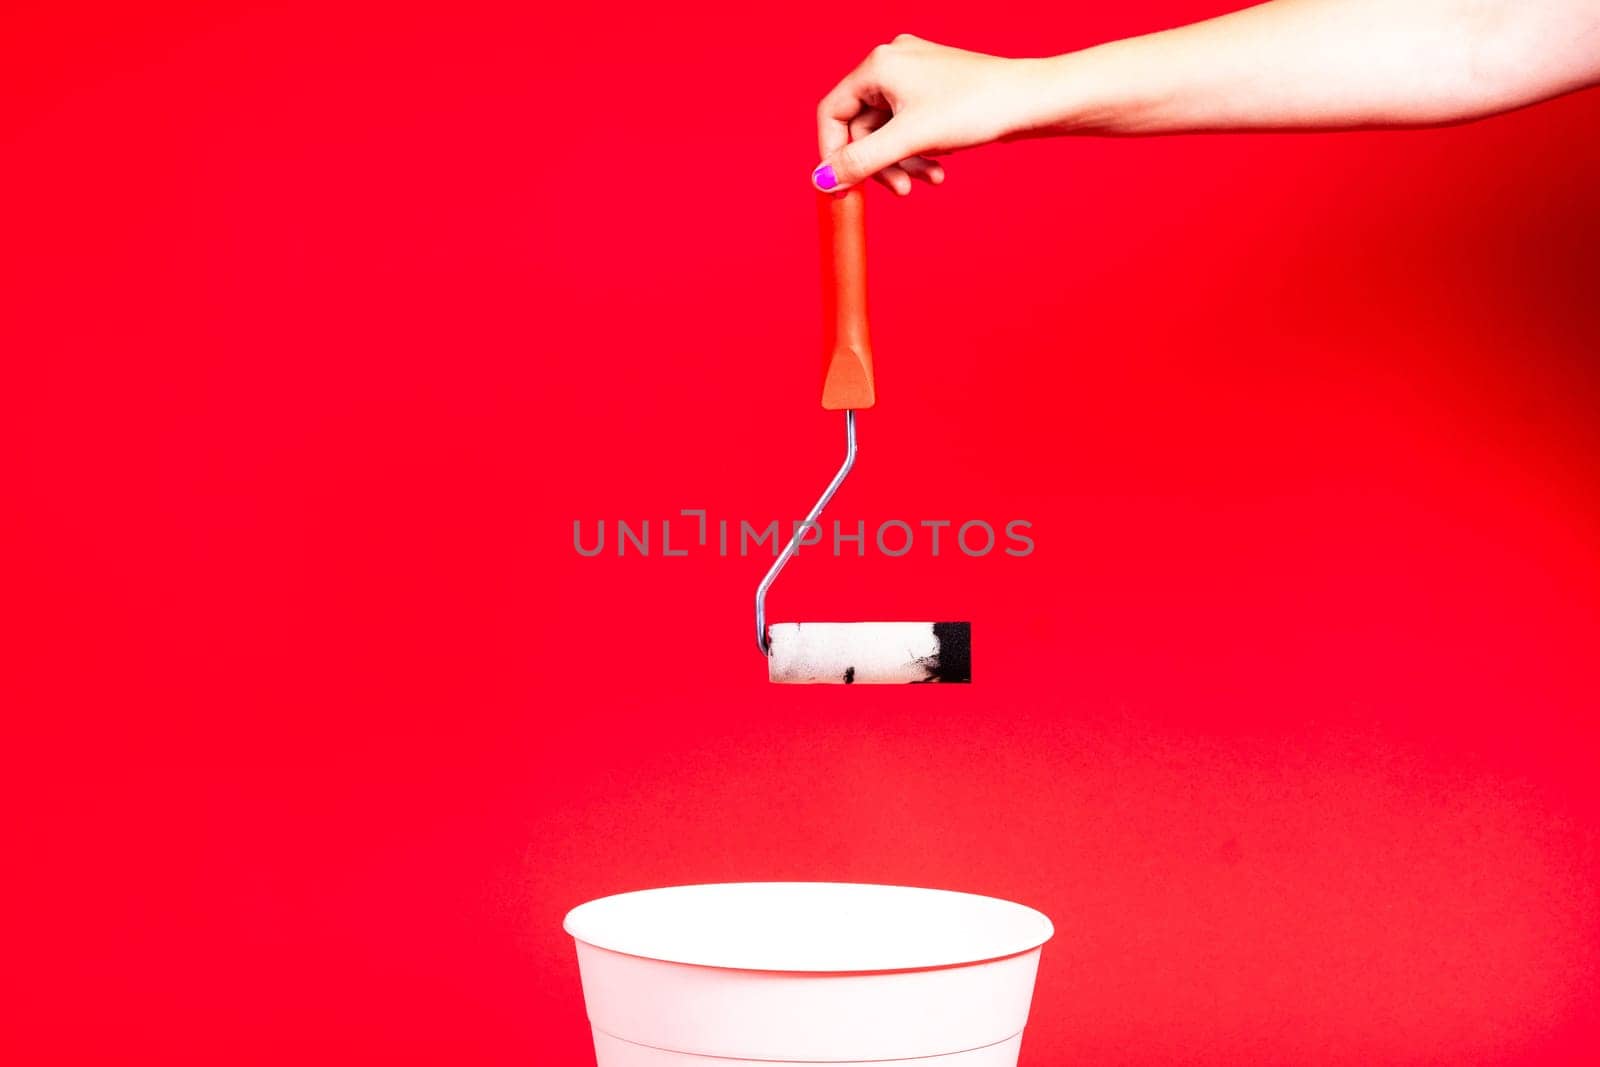 Construction roller is thrown into the trash on red background